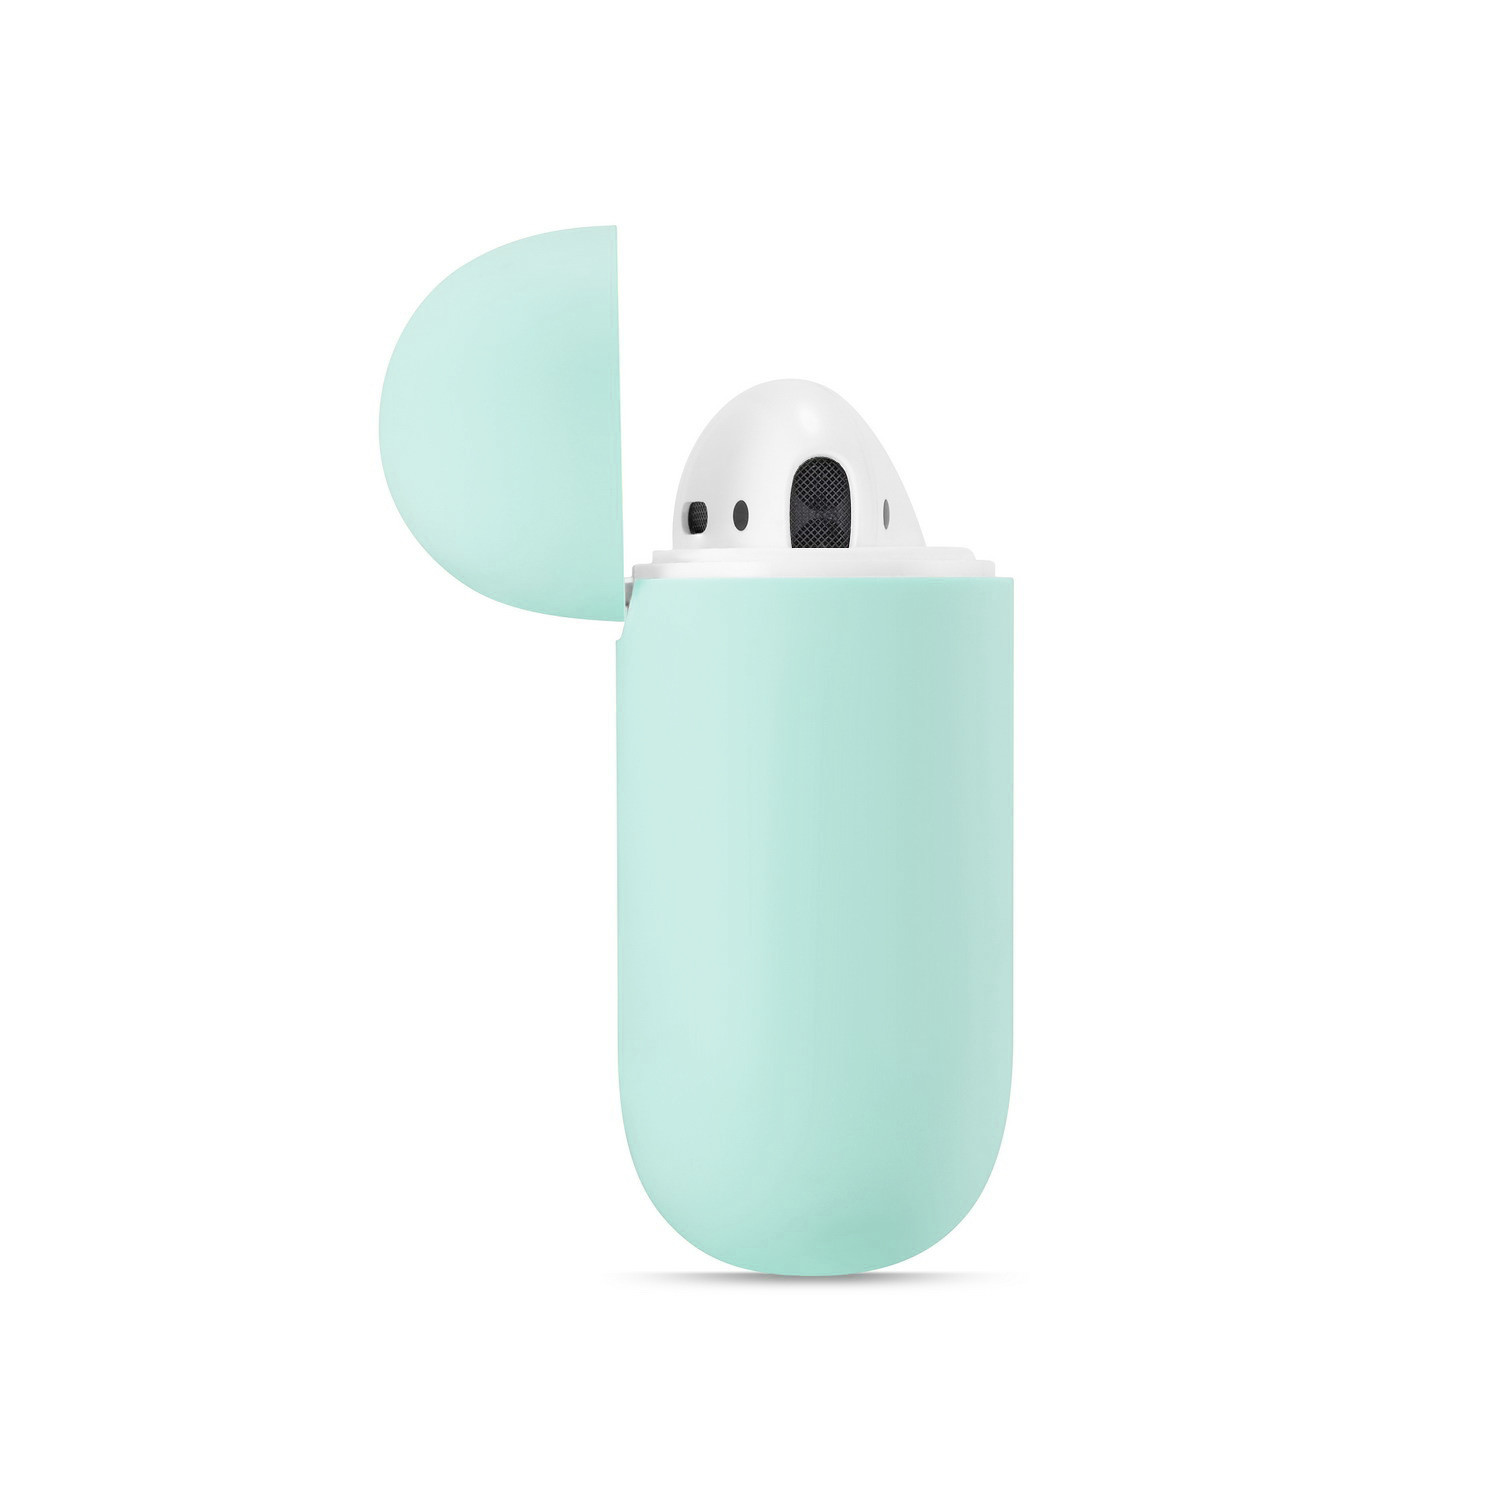 Original Silicone Case for AirPods Pale Green (11) - 2